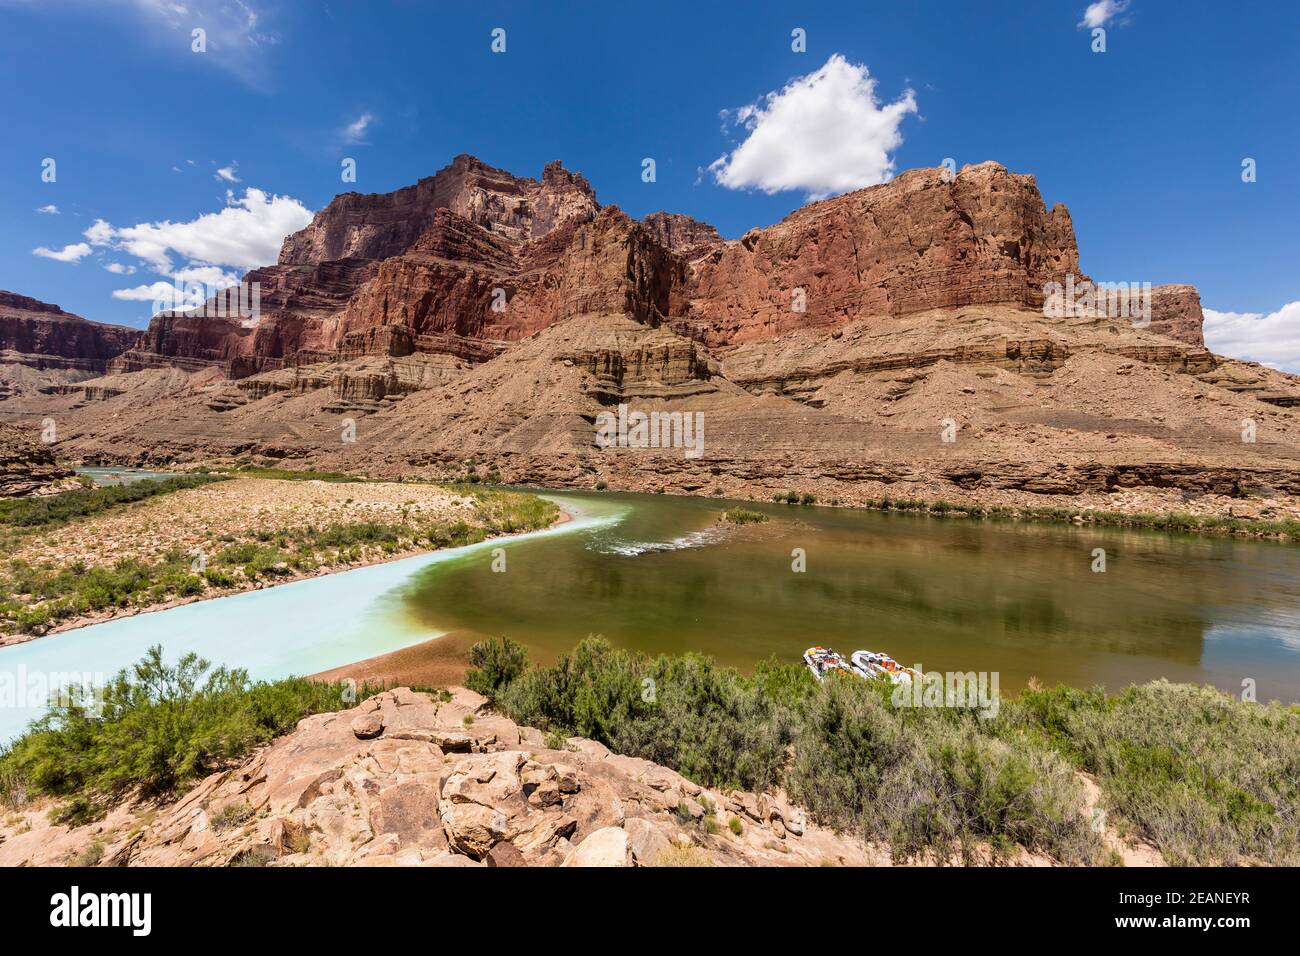 Confluence of the Little Colorado and Colorado Rivers, Grand Canyon National Park, UNESCO World Heritage Site, Arizona, United States of America Stock Photo